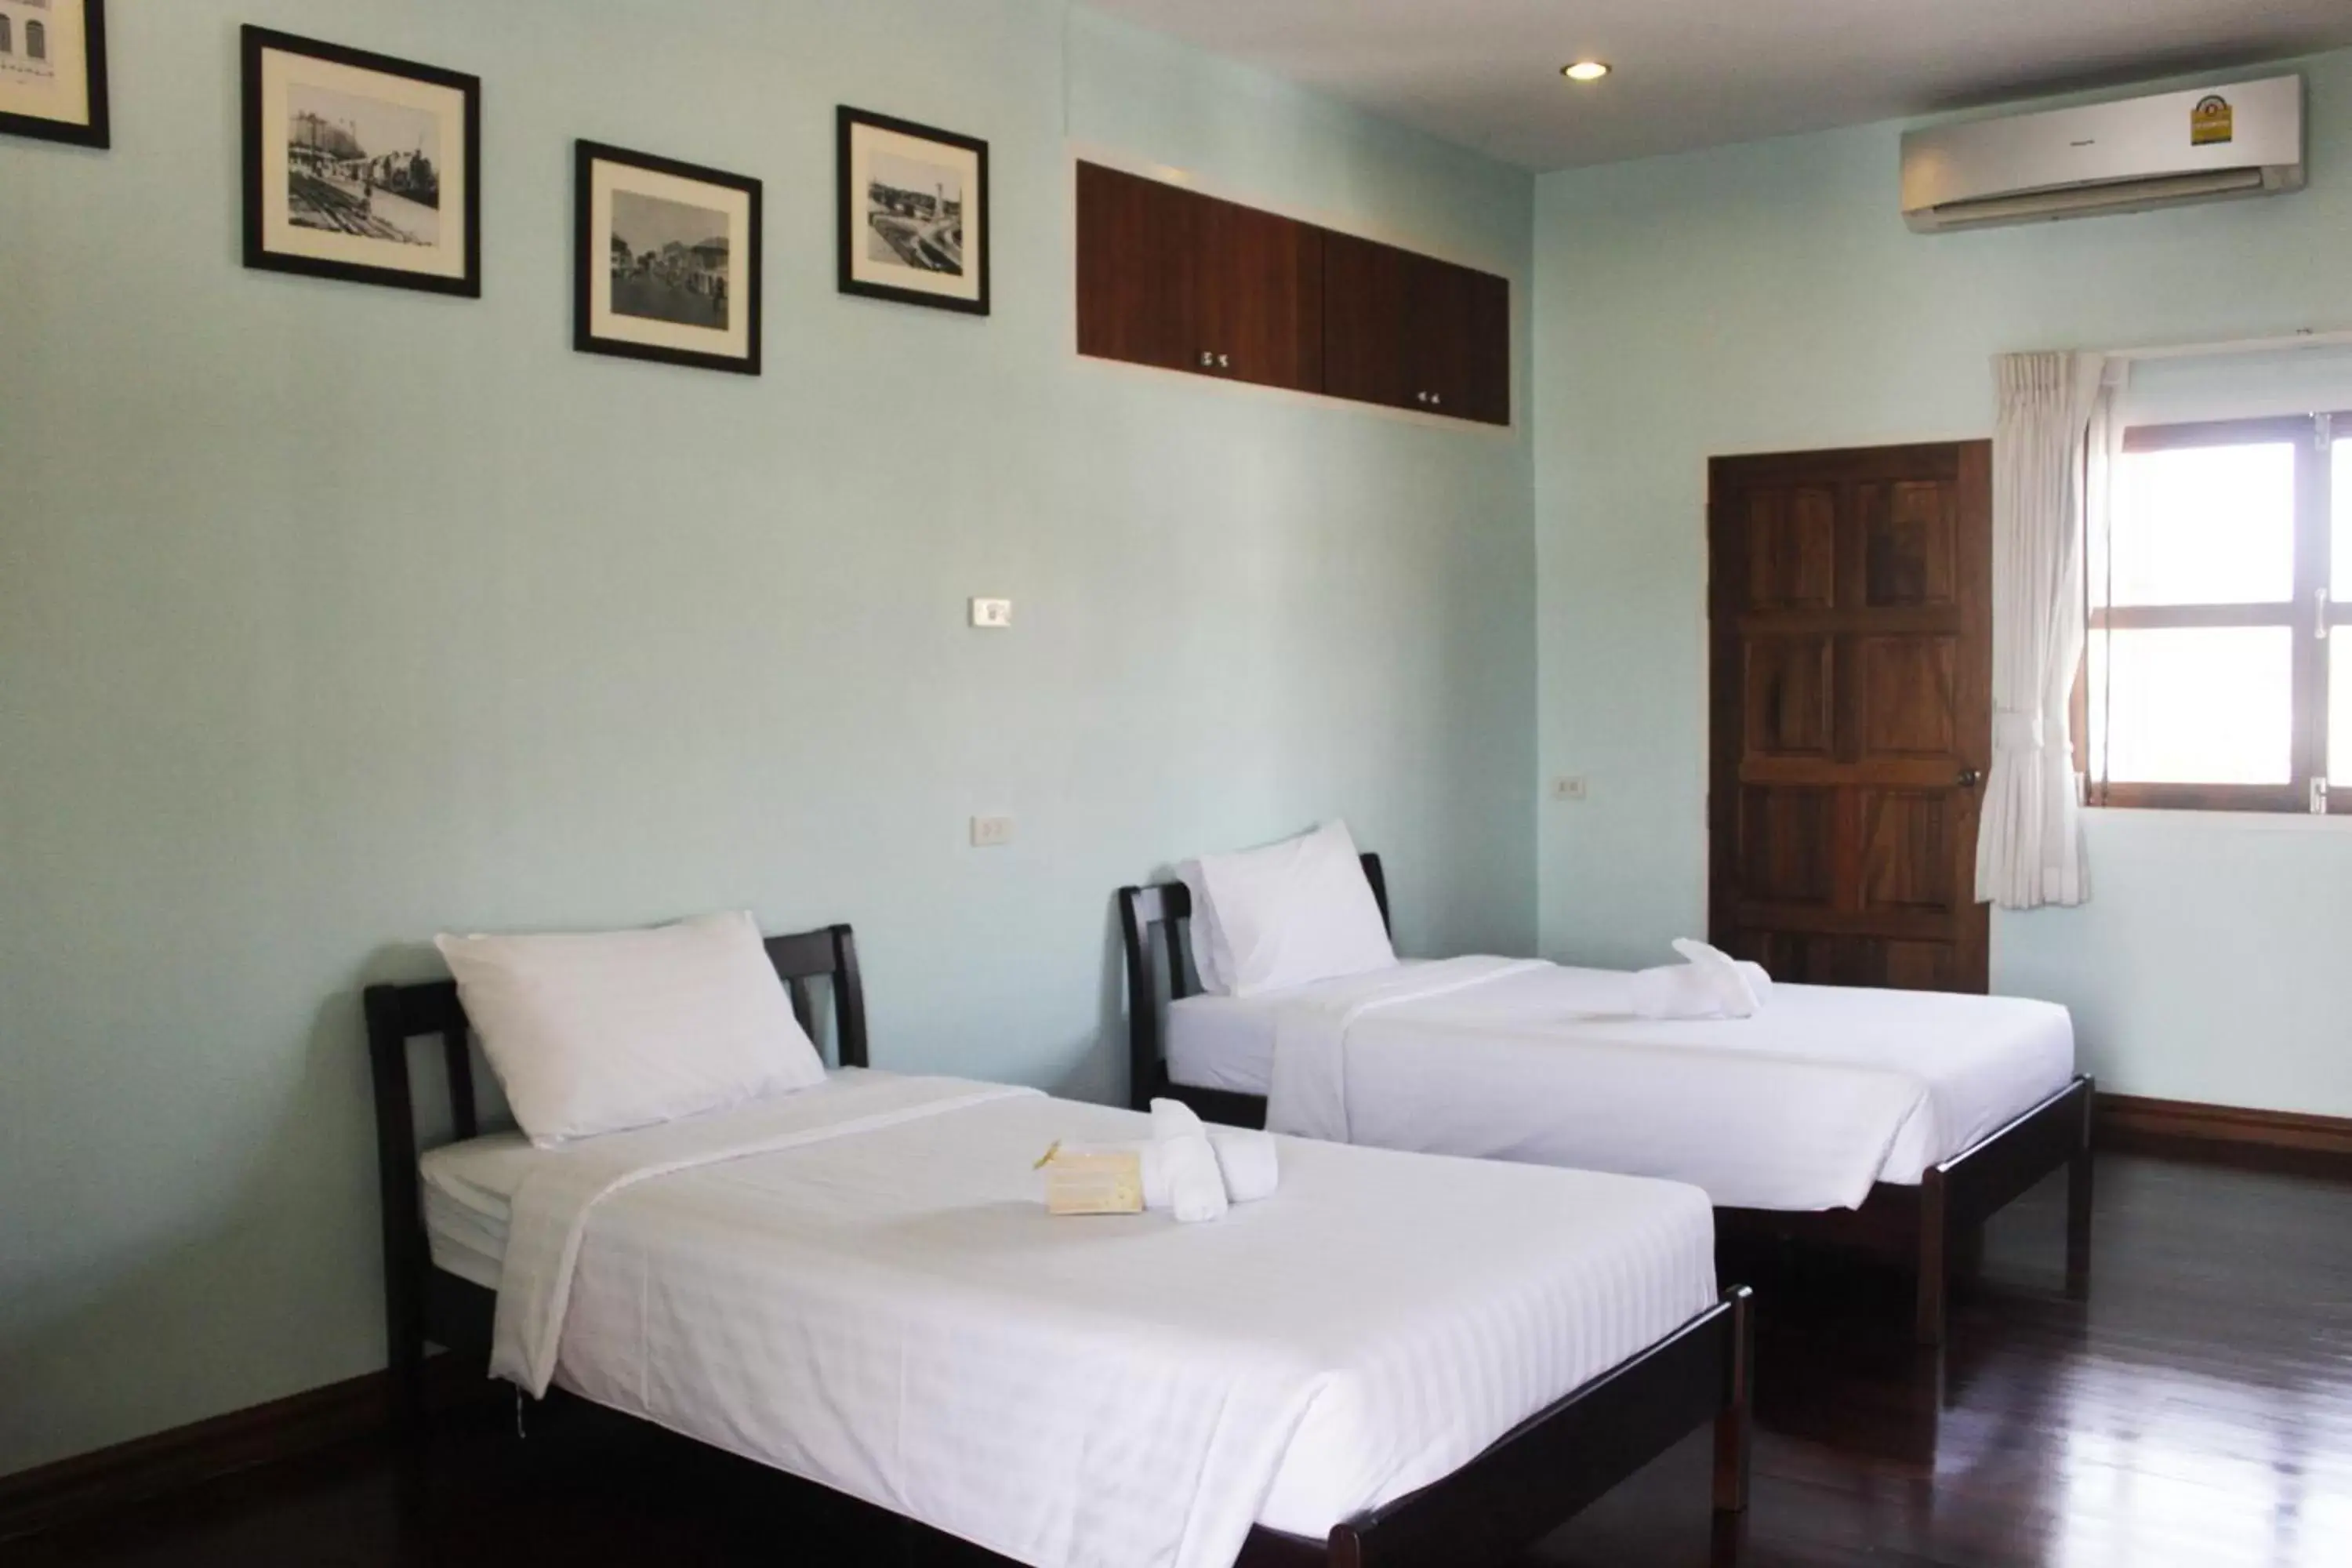 Quadruple Room in Feung Nakorn Balcony Rooms and Cafe